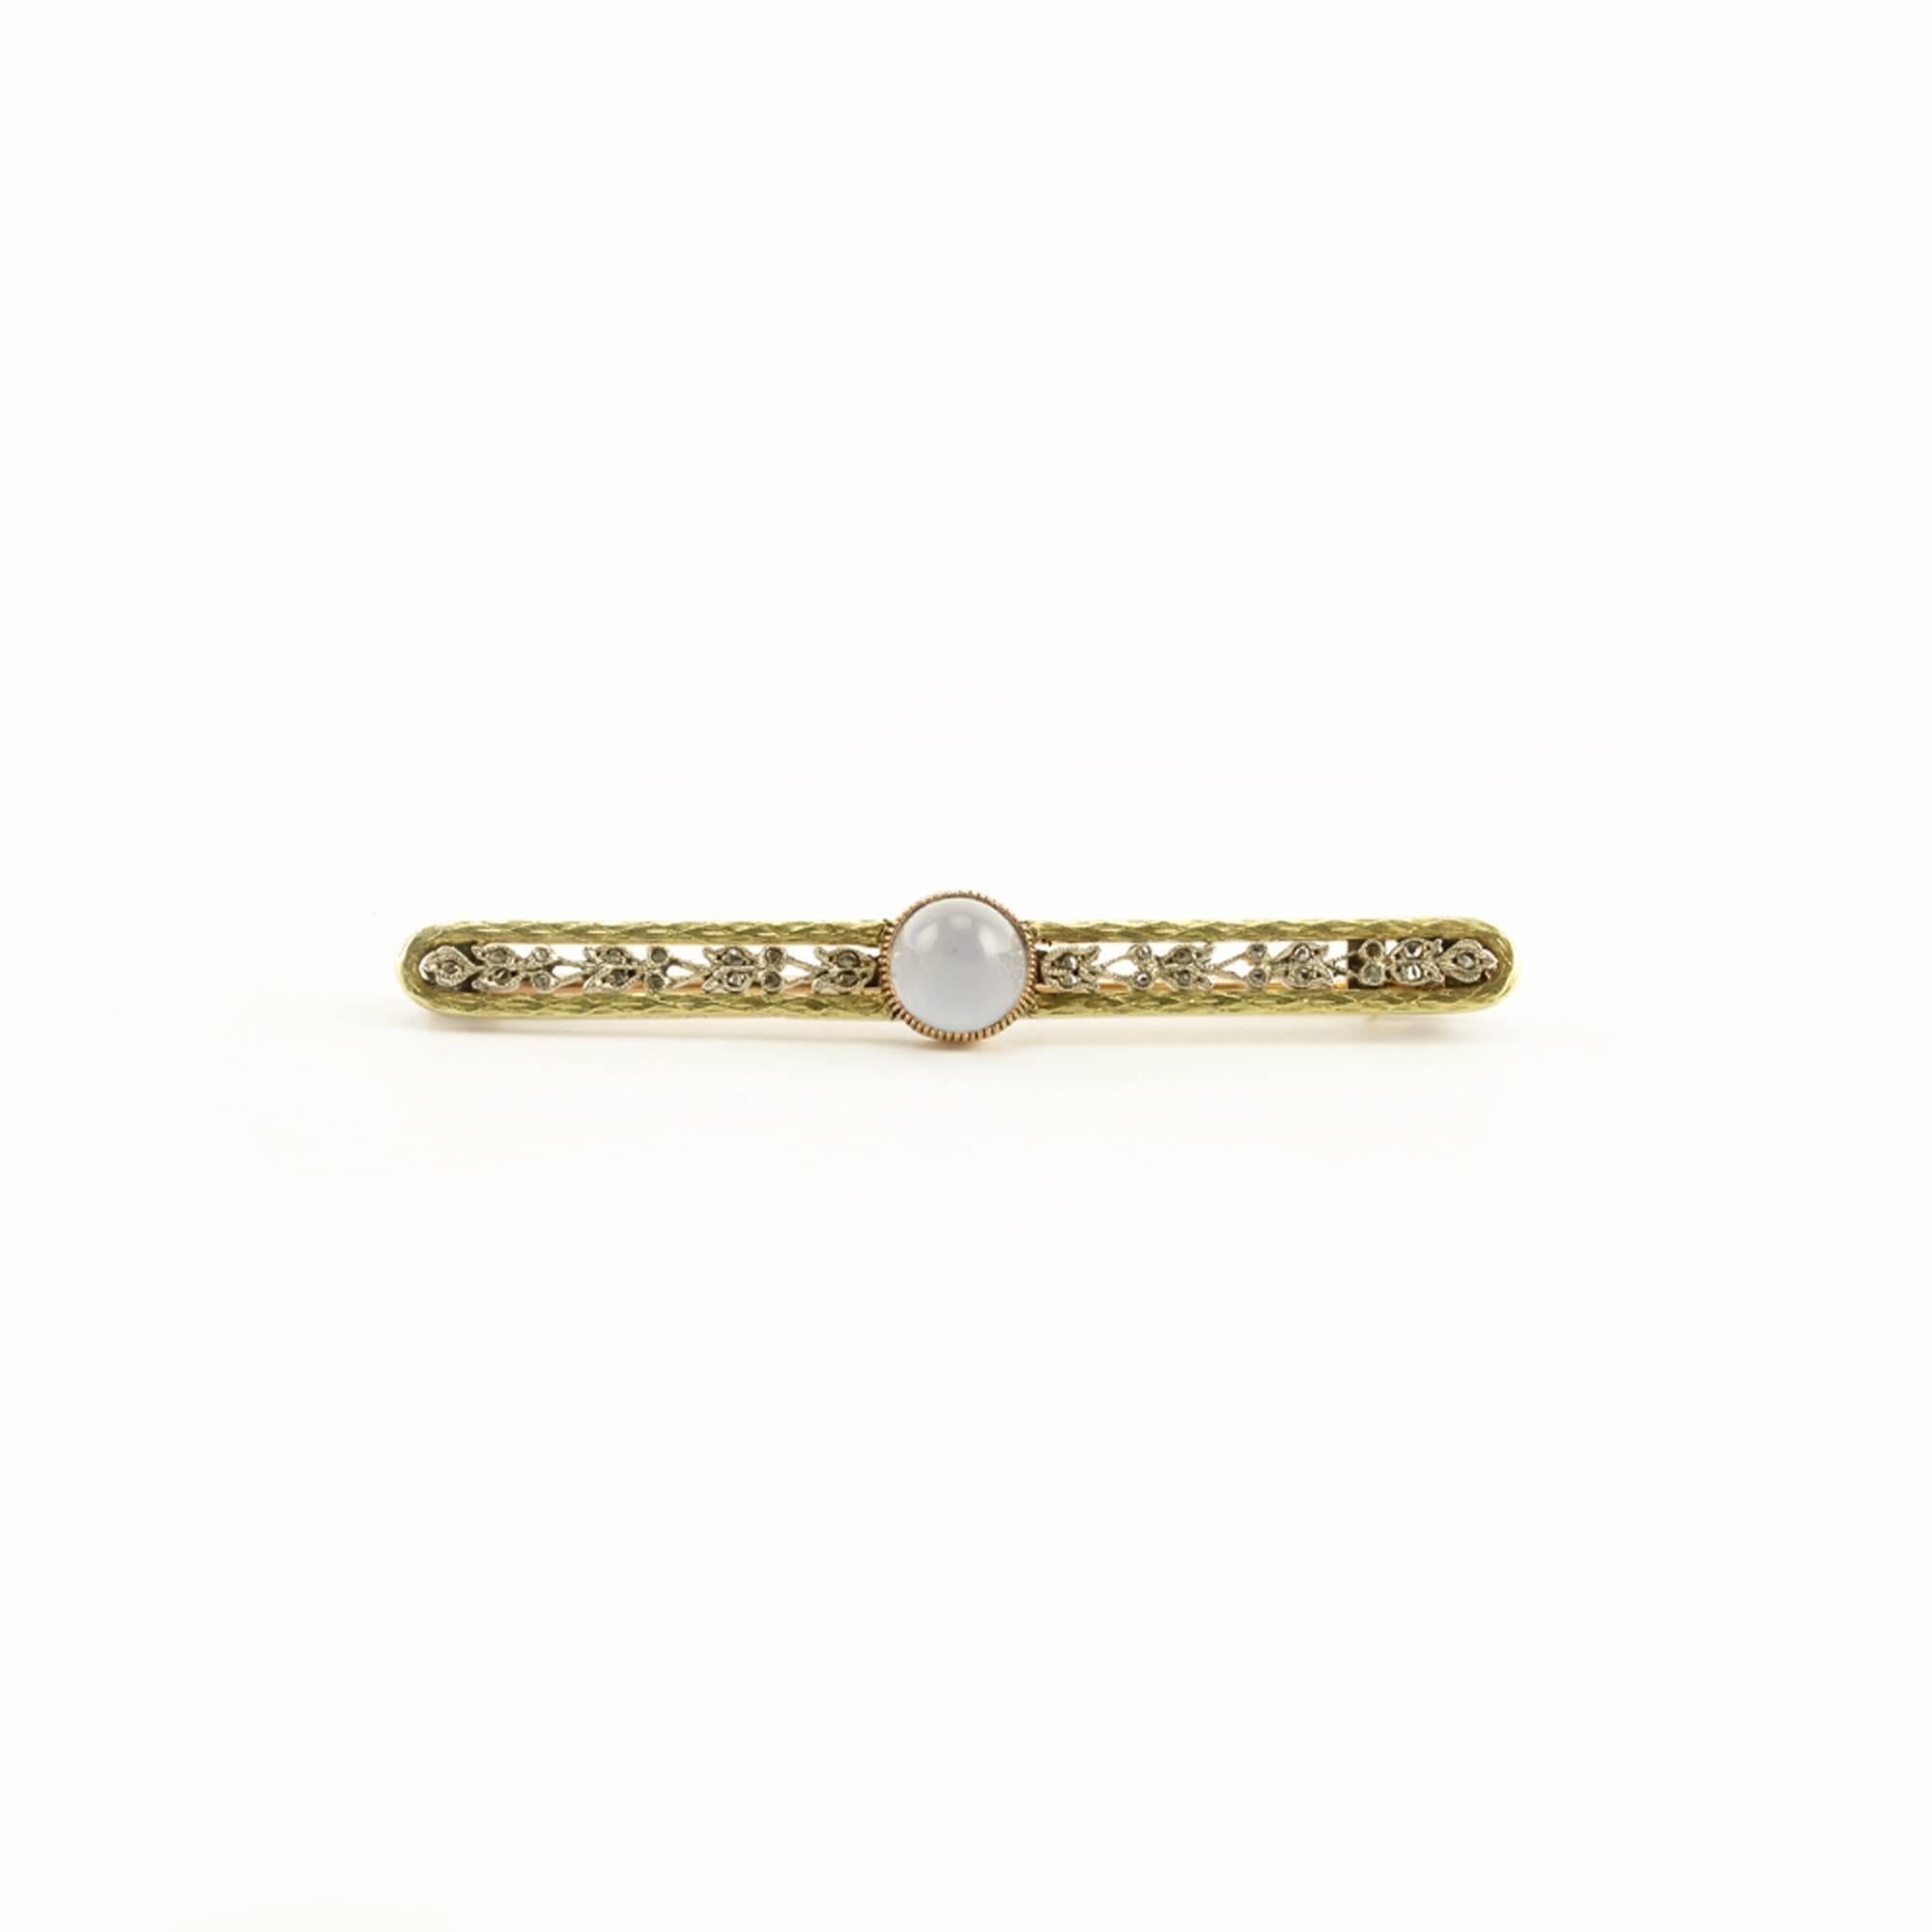 A Fabergé two-color gold, moonstone, and diamond brooch, Moscow, 1908-1917. The oblong bar brooch centered with a cabochon sugarloaf moonstone flanked by rose diamond-set floral bands within a chased green gold laurel leaf border, struck with